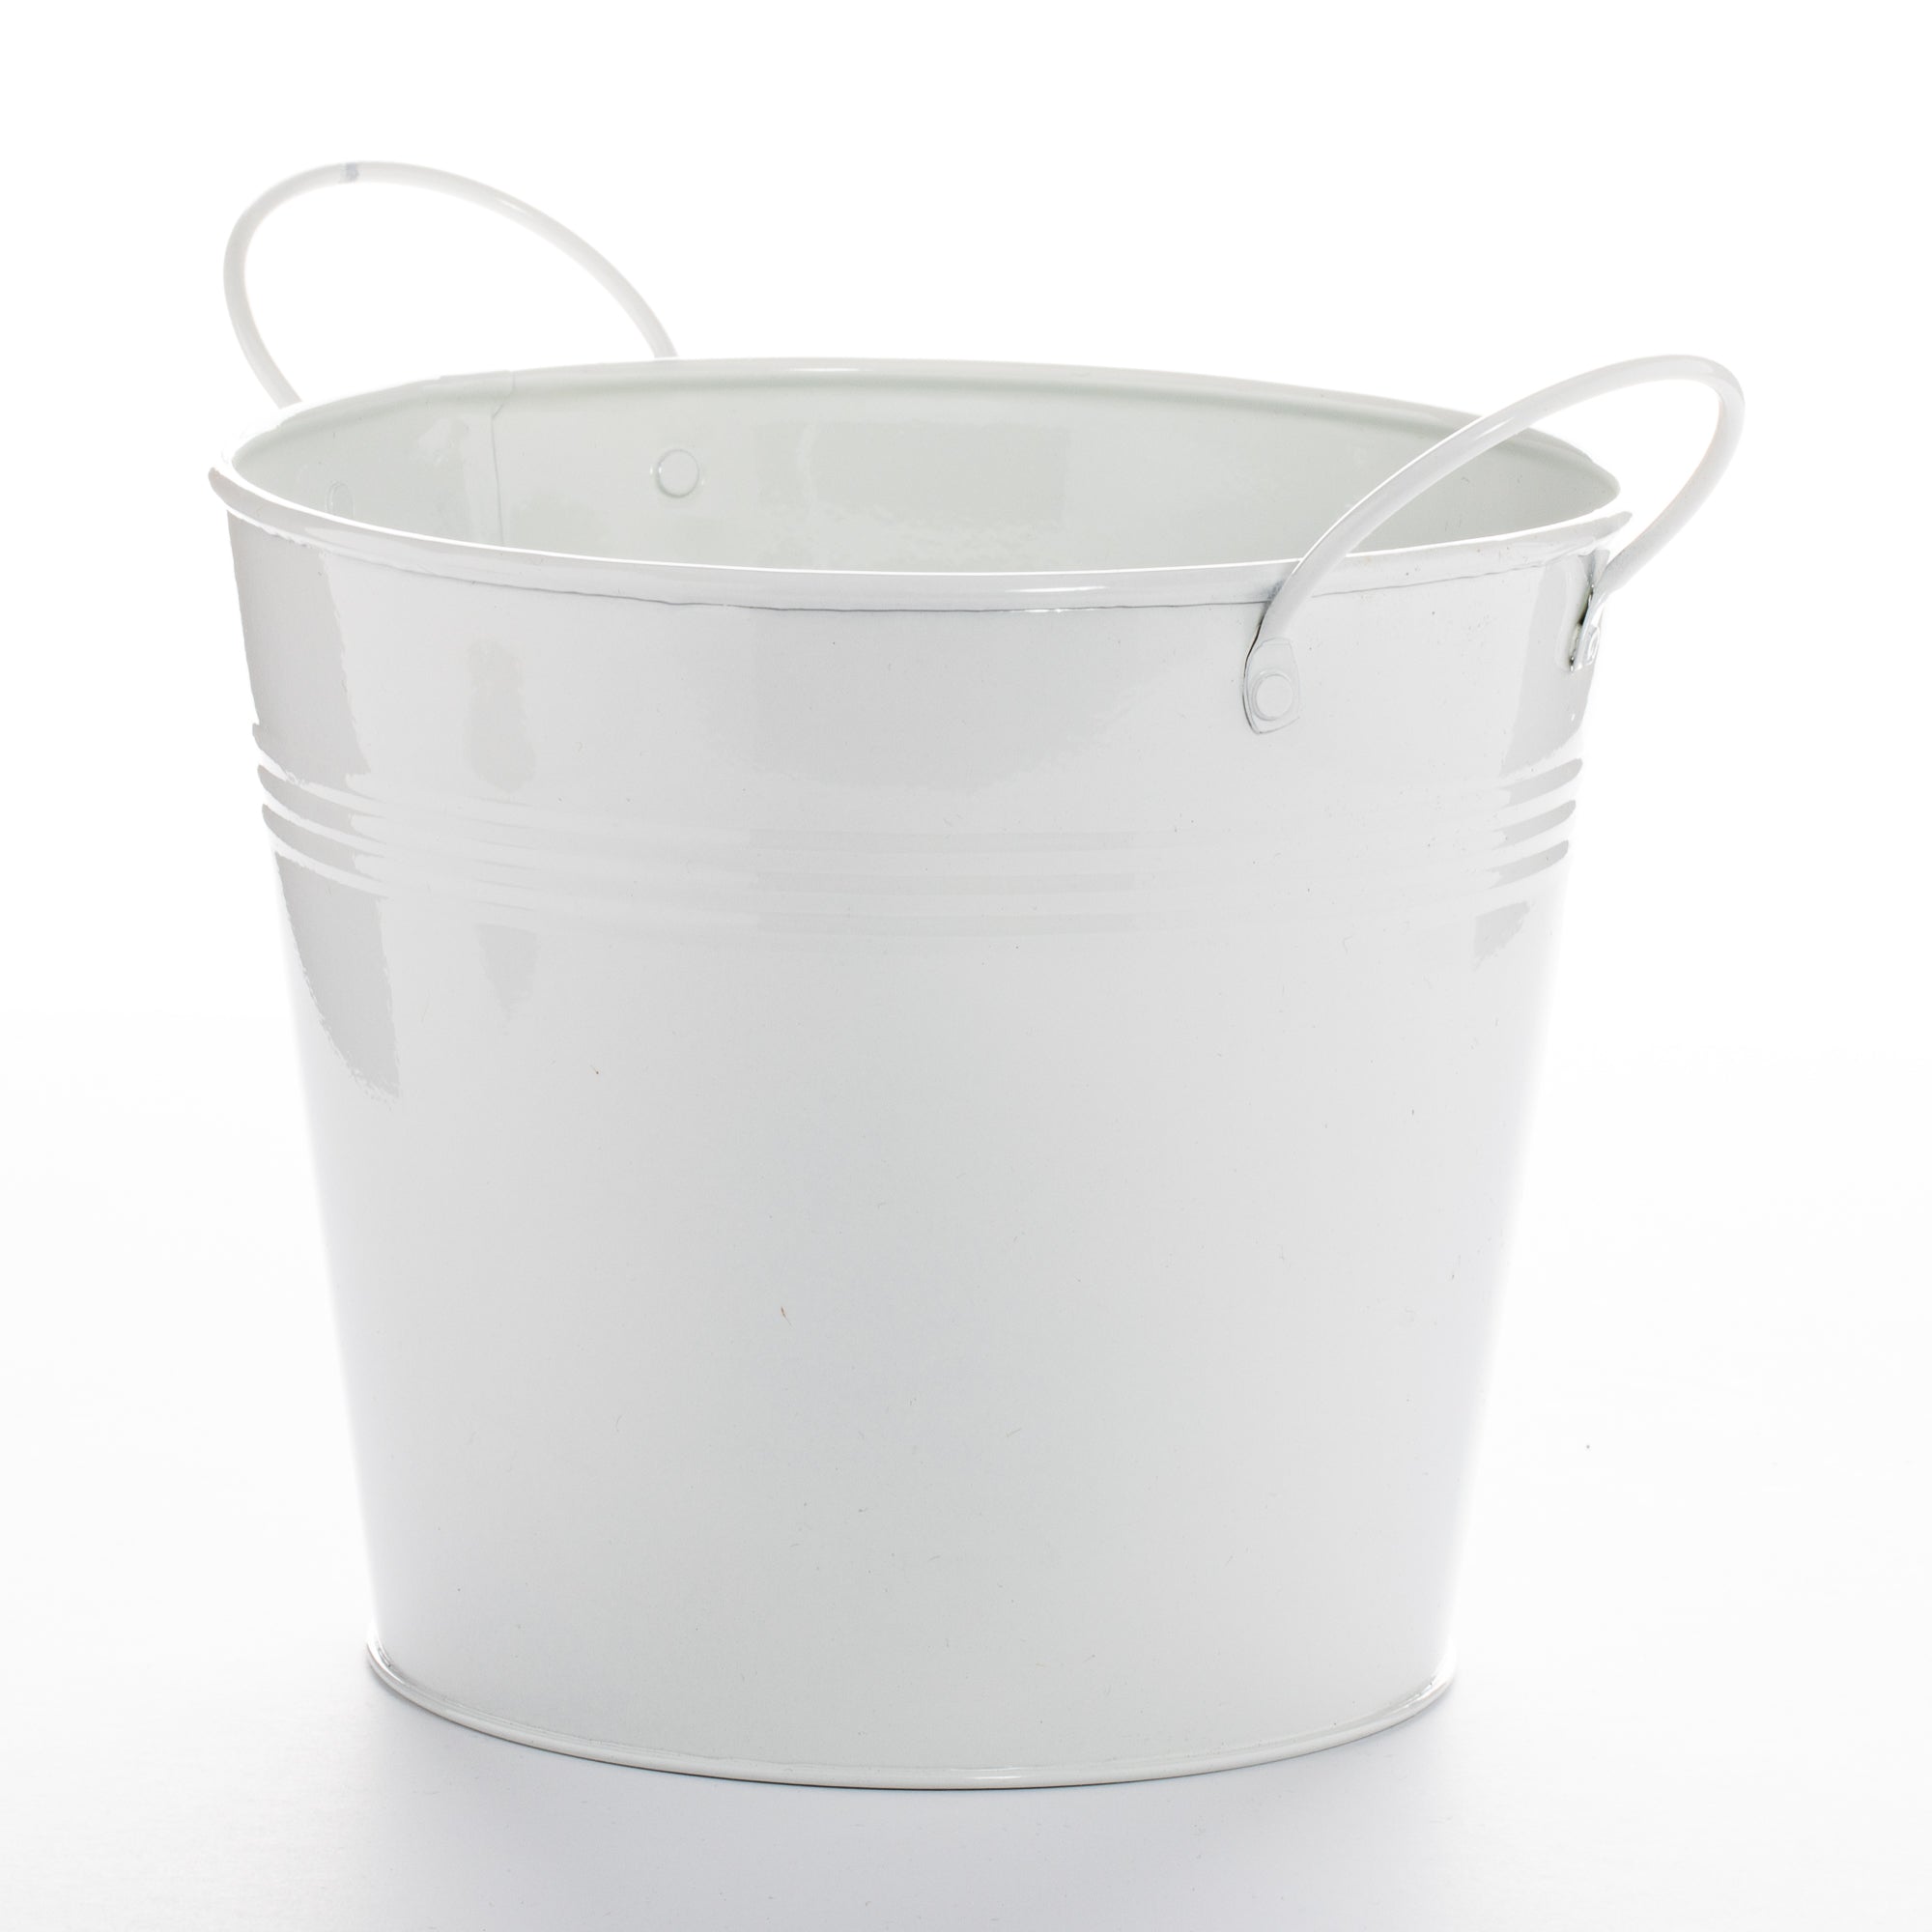 White Enamel 10 Bucket with Swivel Handle - Quick Candles